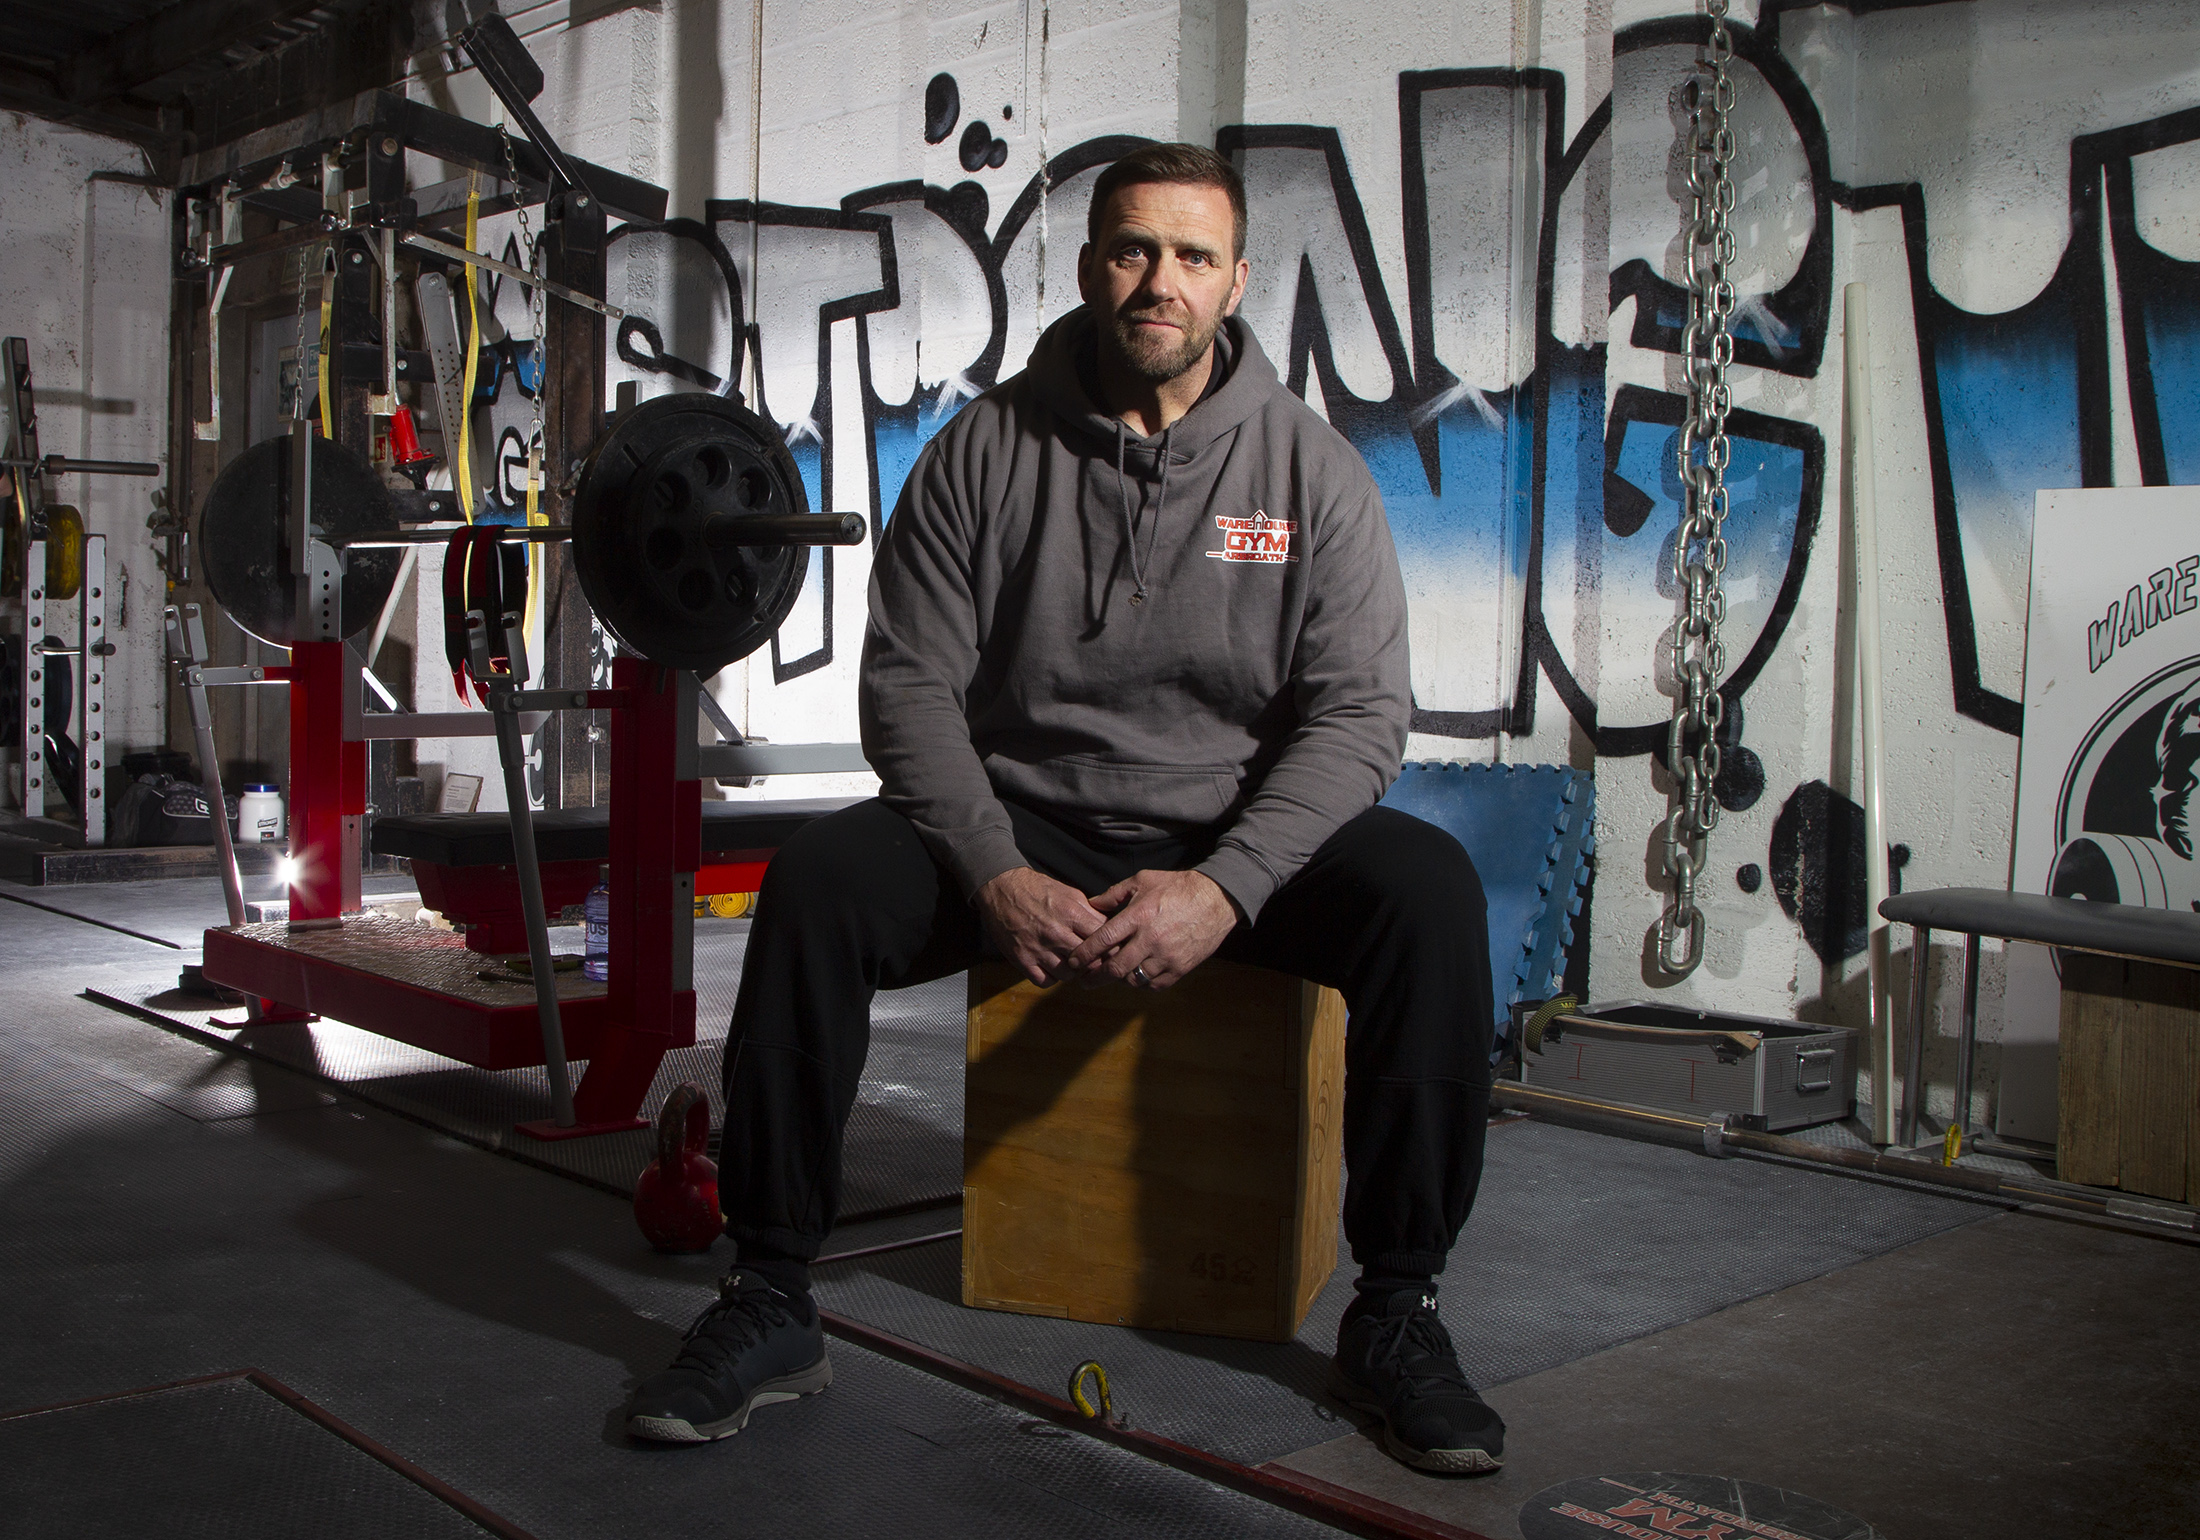 Lee Page owner of The Warehouse a gym in Arbroath.